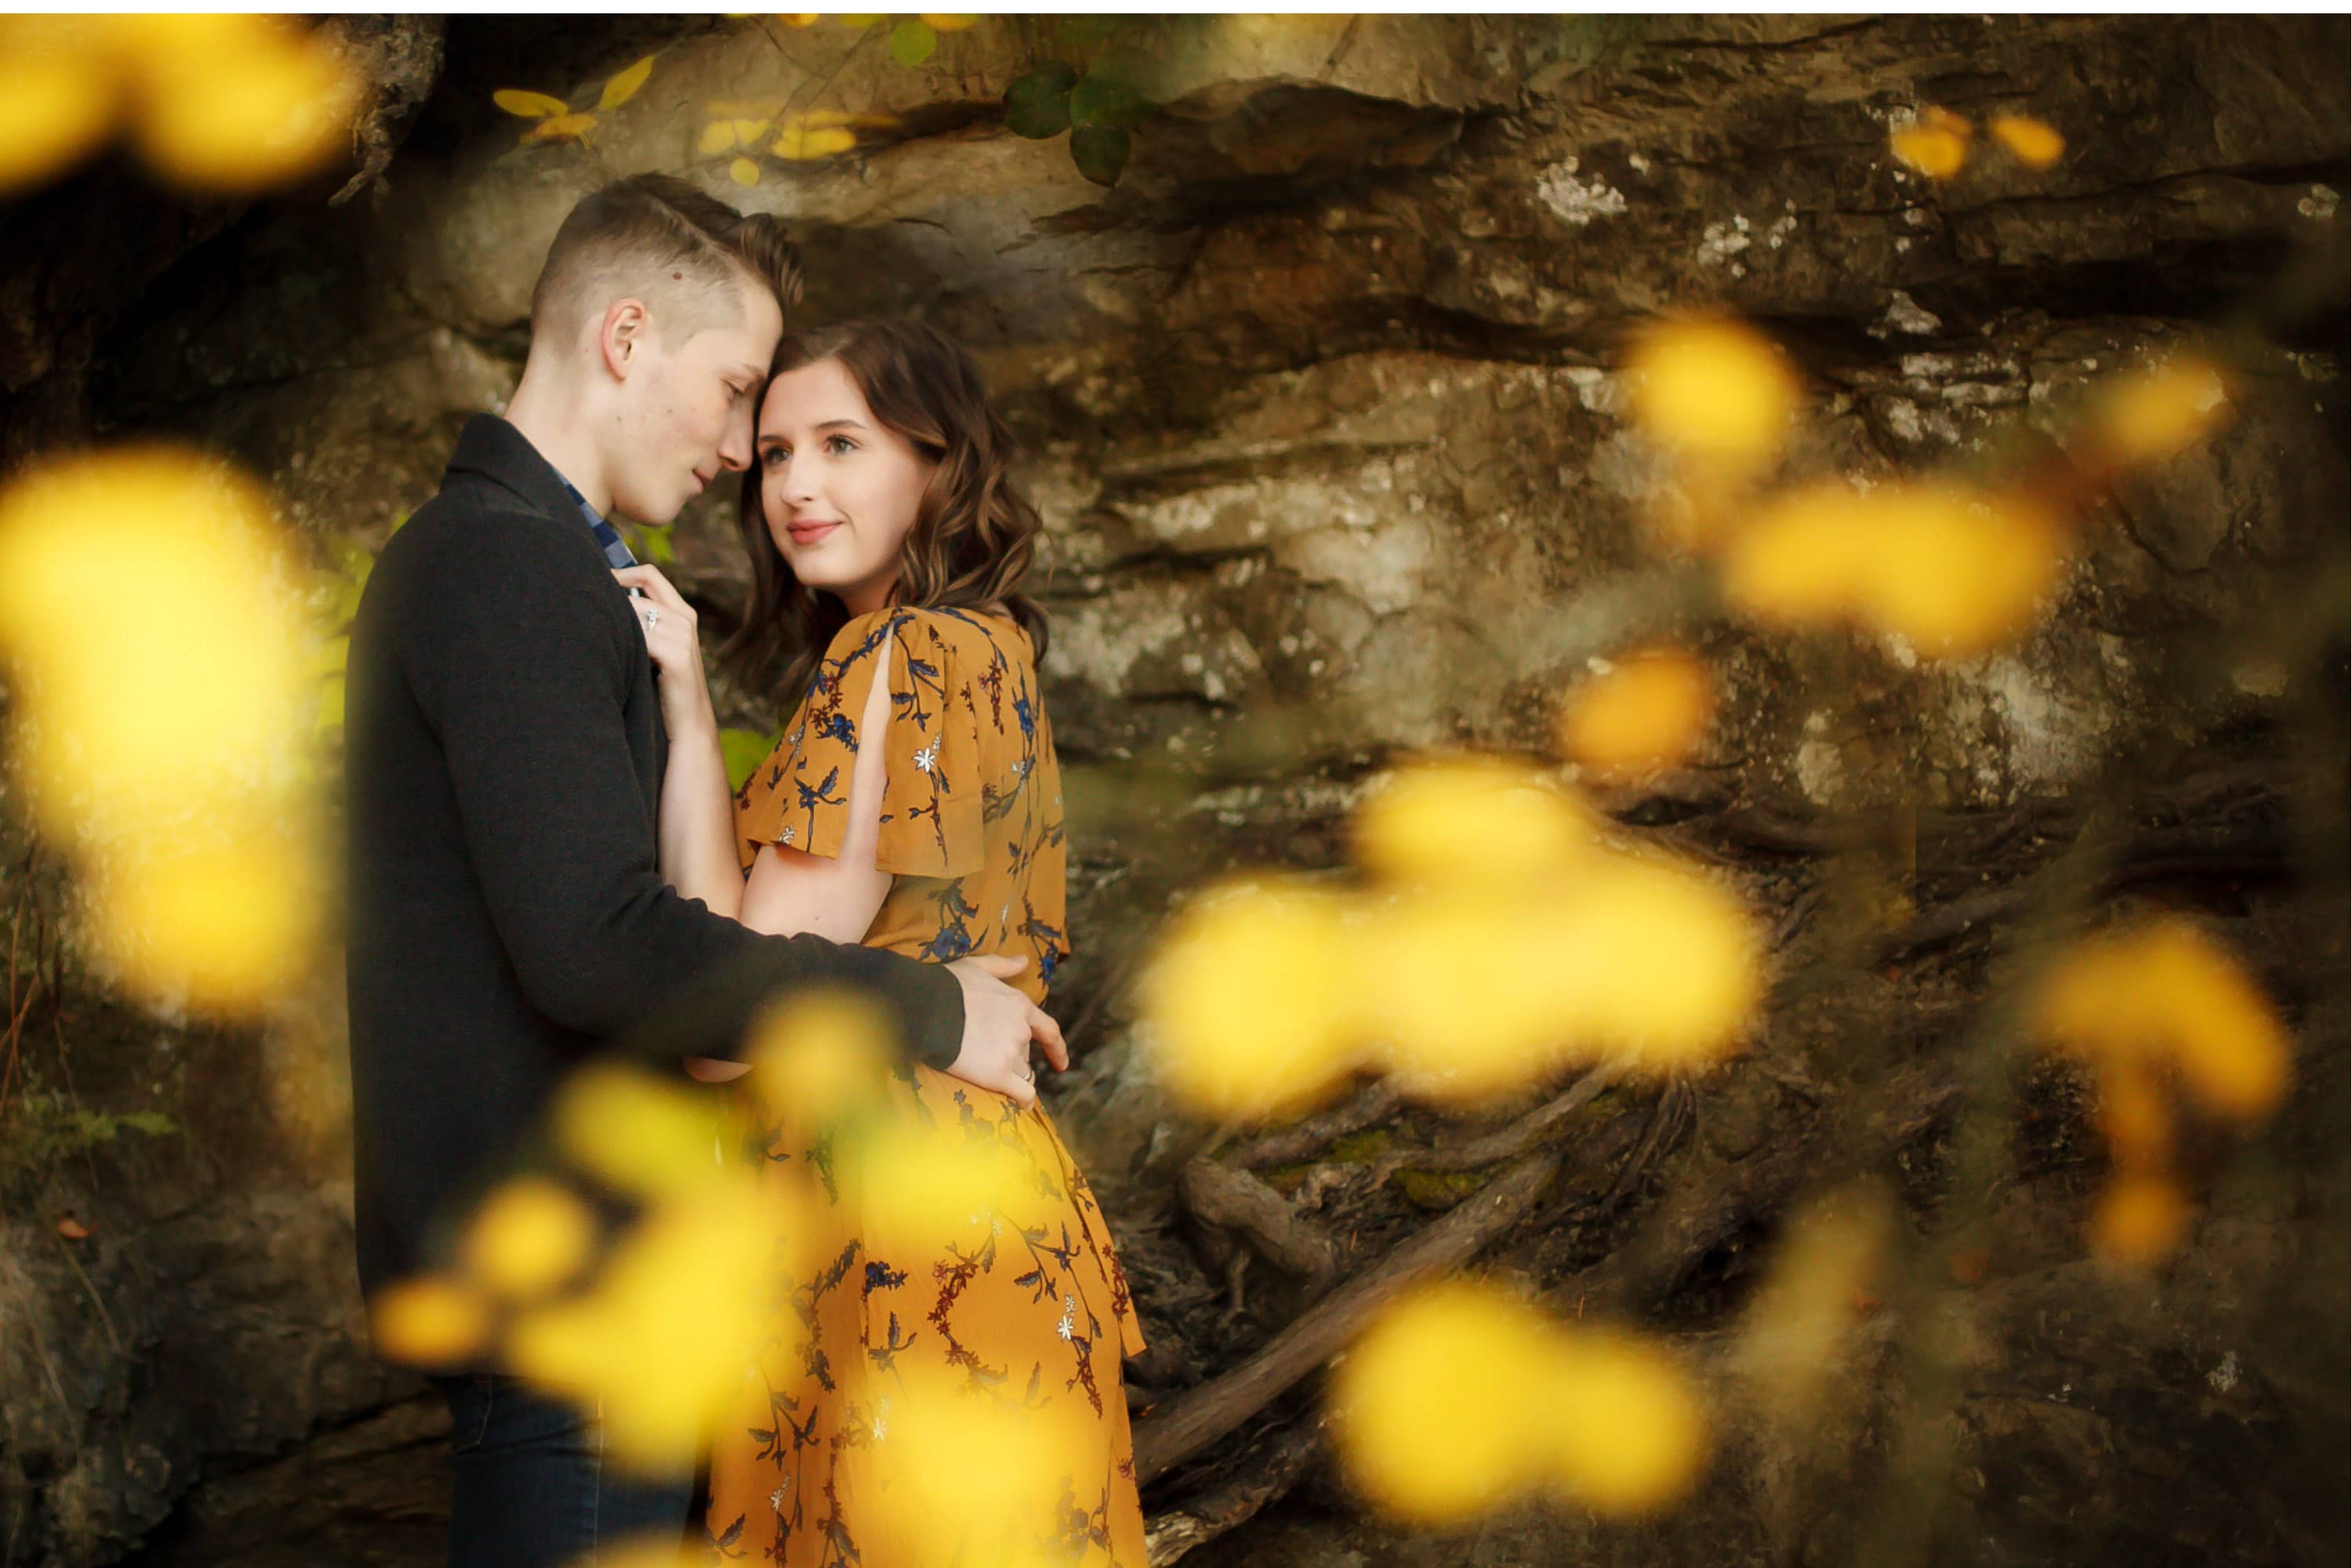 pnw adventure engagement session in bellingham wa fall photo inspiration